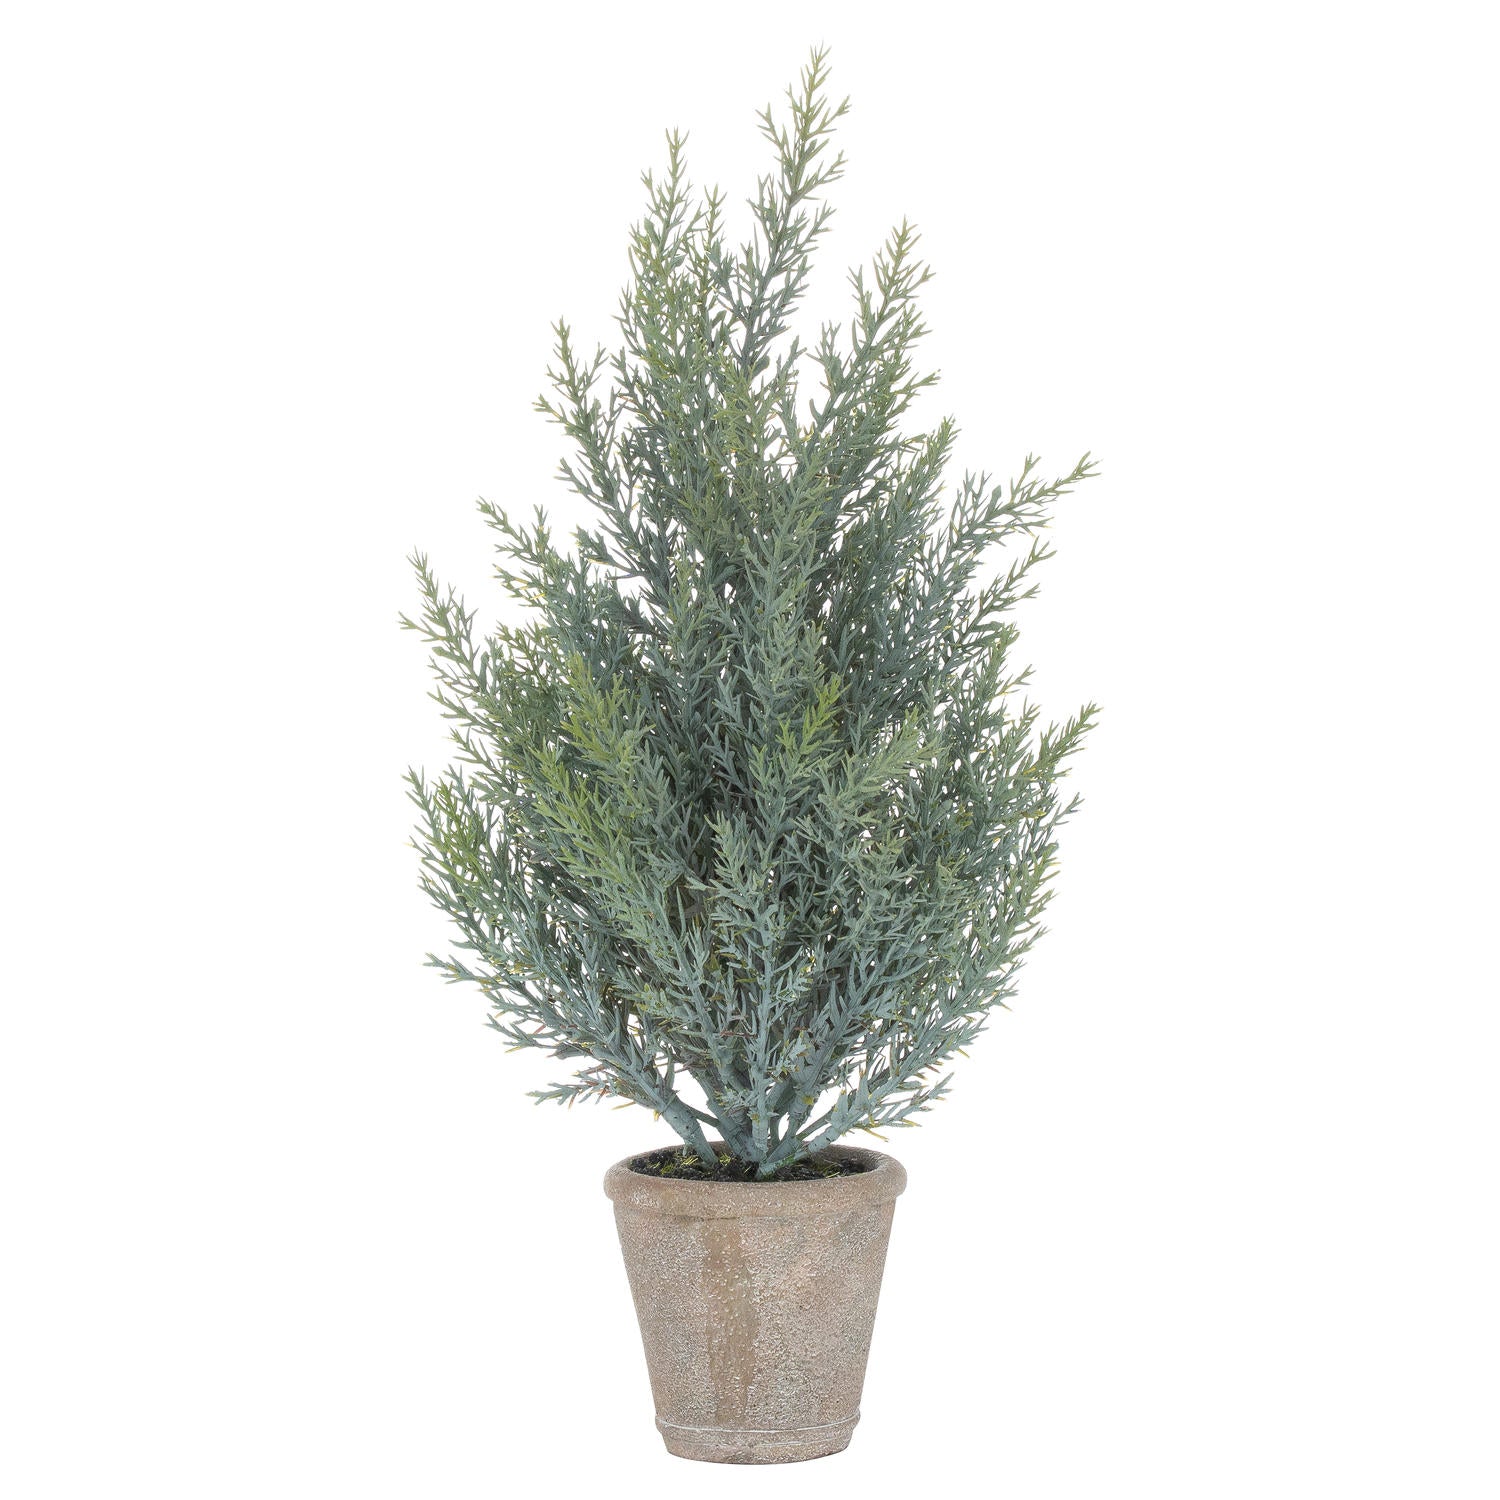 View Squat Christmas Fir Tree In Stone Pot information